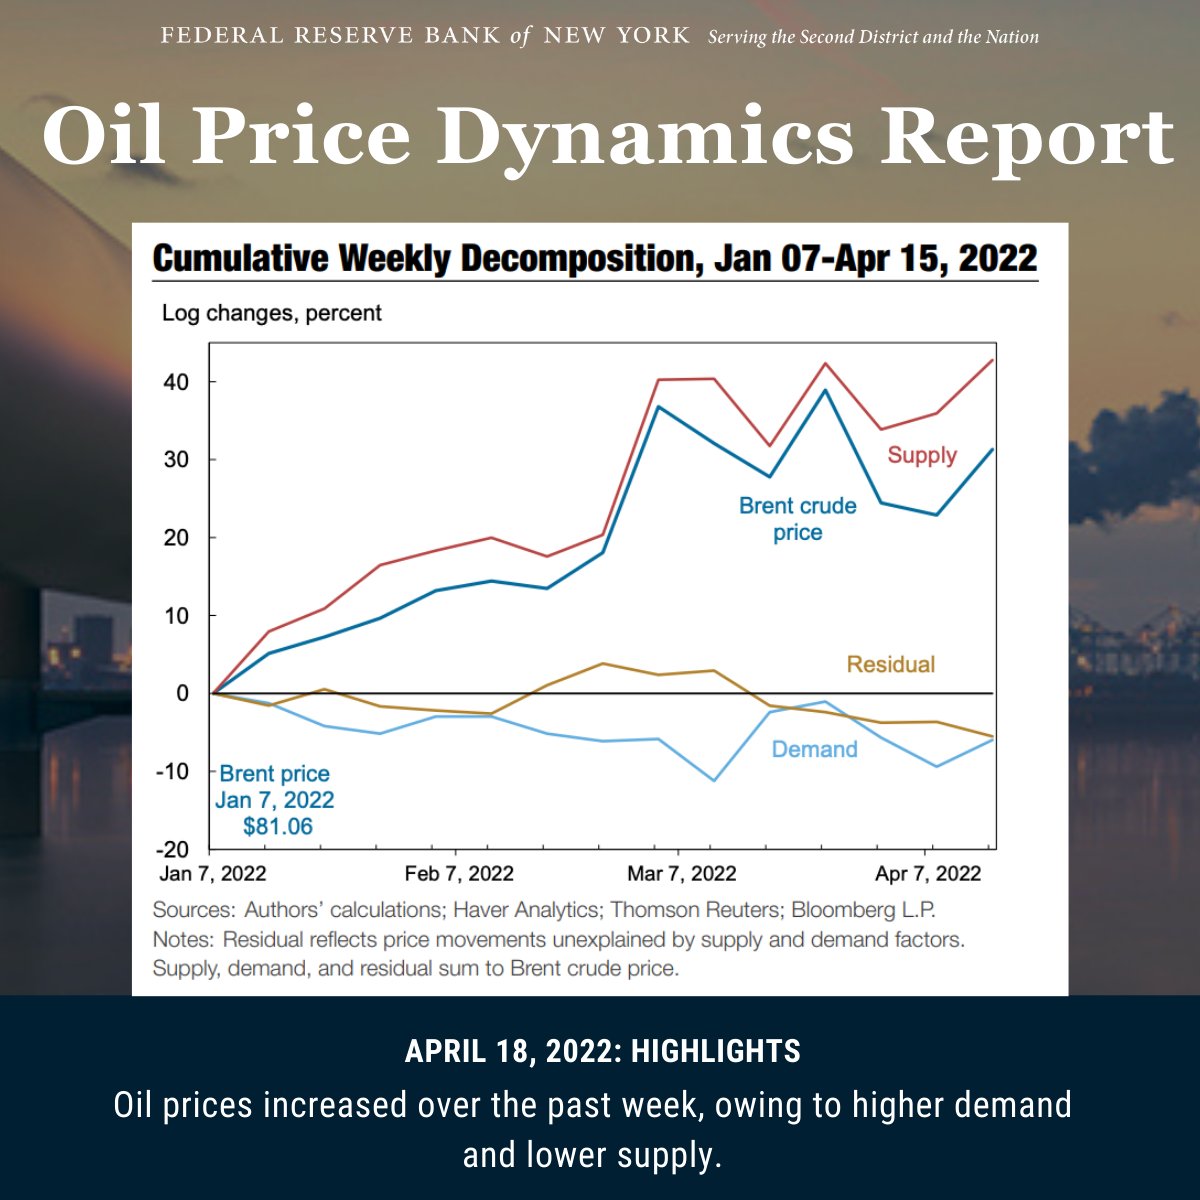 JUST RELEASED: Oil Price Dynamics Report → Over the past week, an increase in demand expectations and a decrease in anticipated supply resulted in higher oil prices. Read more: nyfed.org/OilPrice